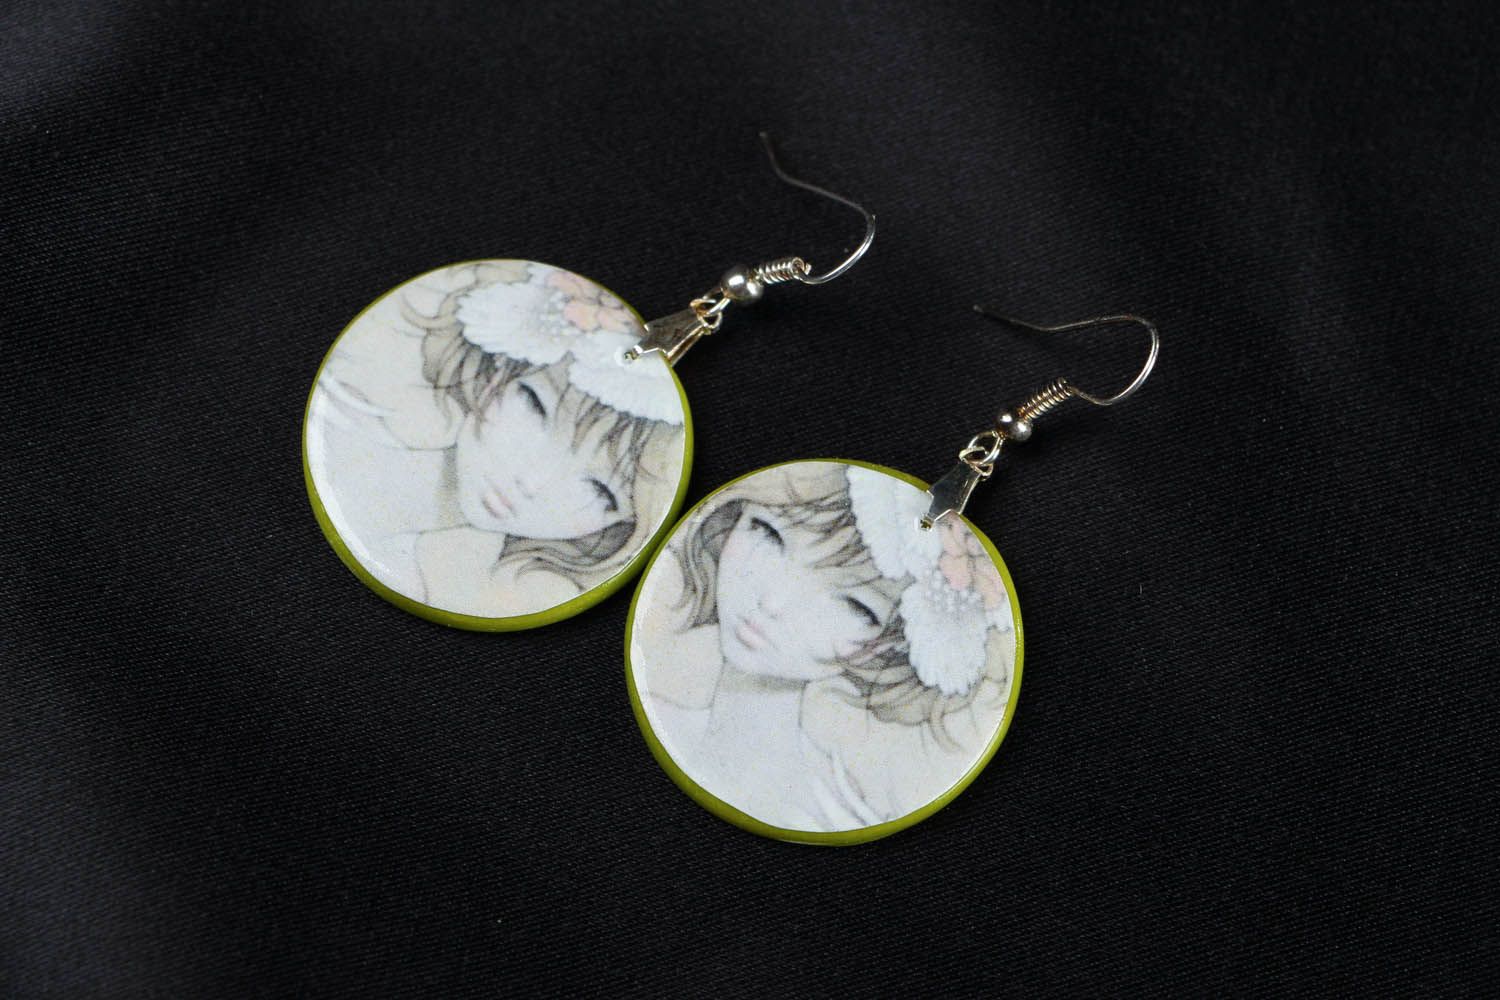 Earrings made ​​of polymer clay photo 1